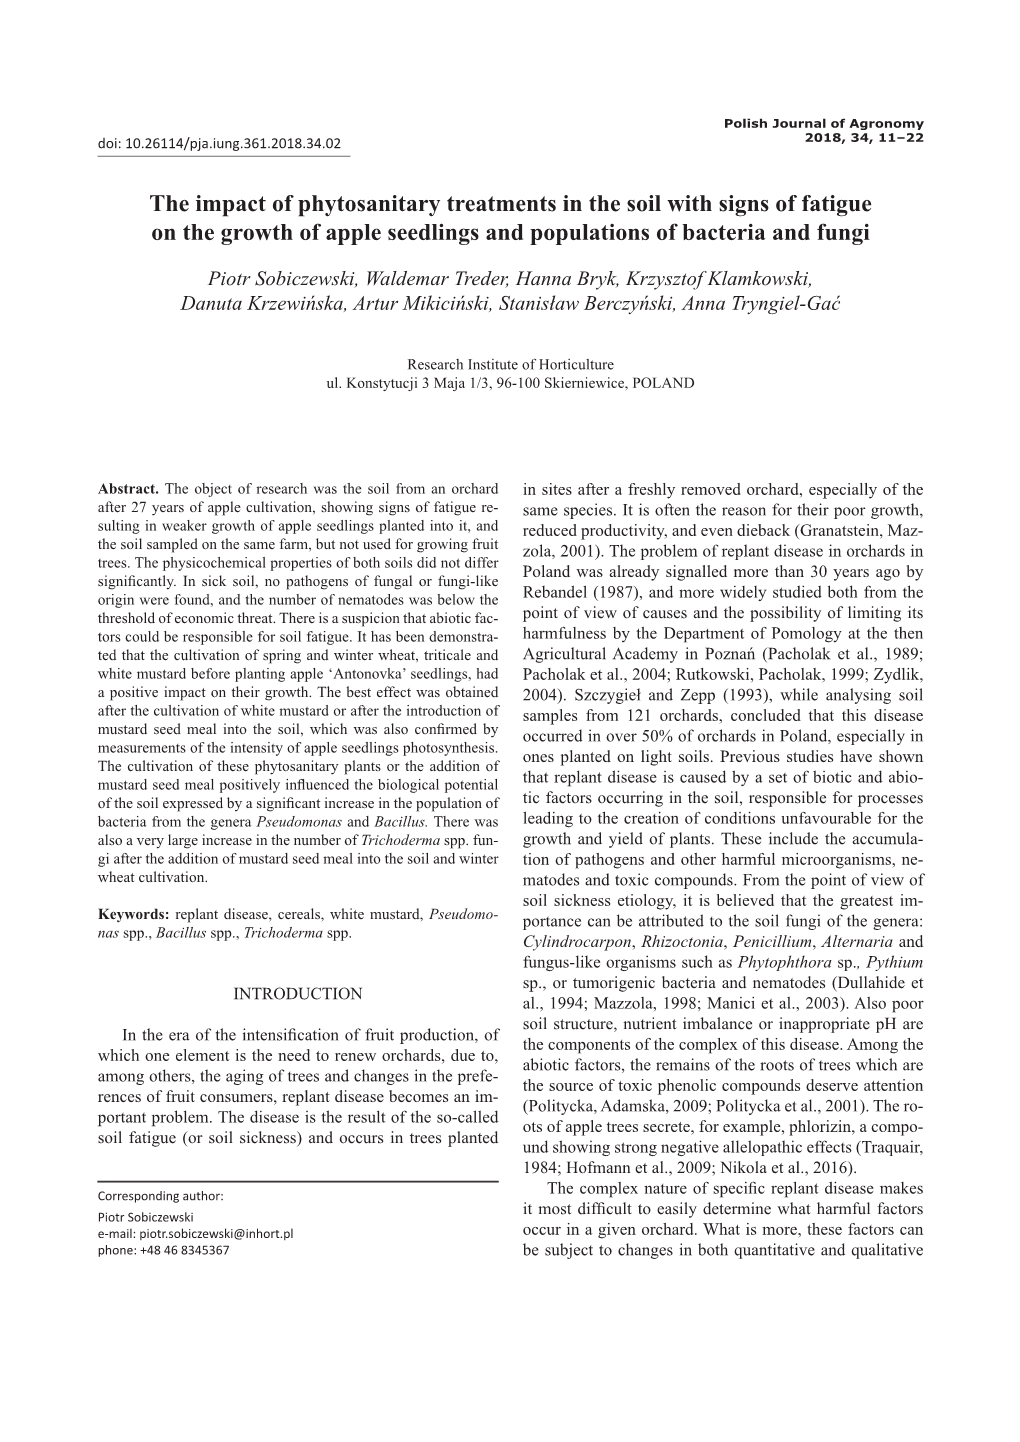 The Impact of Phytosanitary Treatments in the Soil with Signs of Fatigue on the Growth of Apple Seedlings and Populations of Bacteria and Fungi